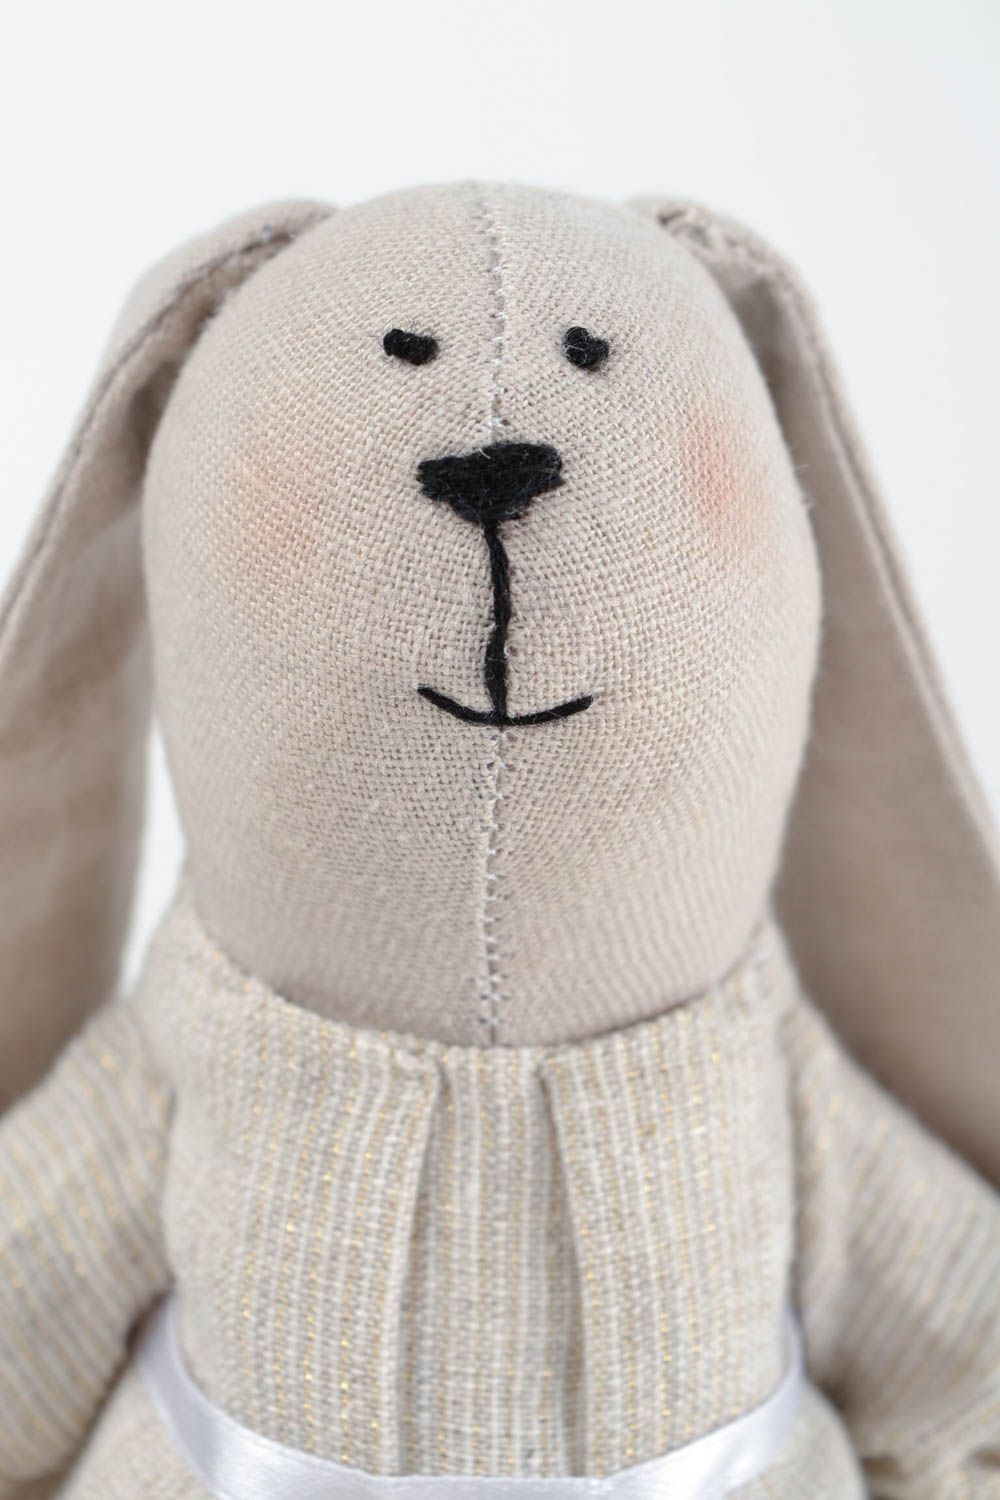 Handmade toy soft toy rabbit toy stuffed animals cool gifts for gifts home decor photo 4